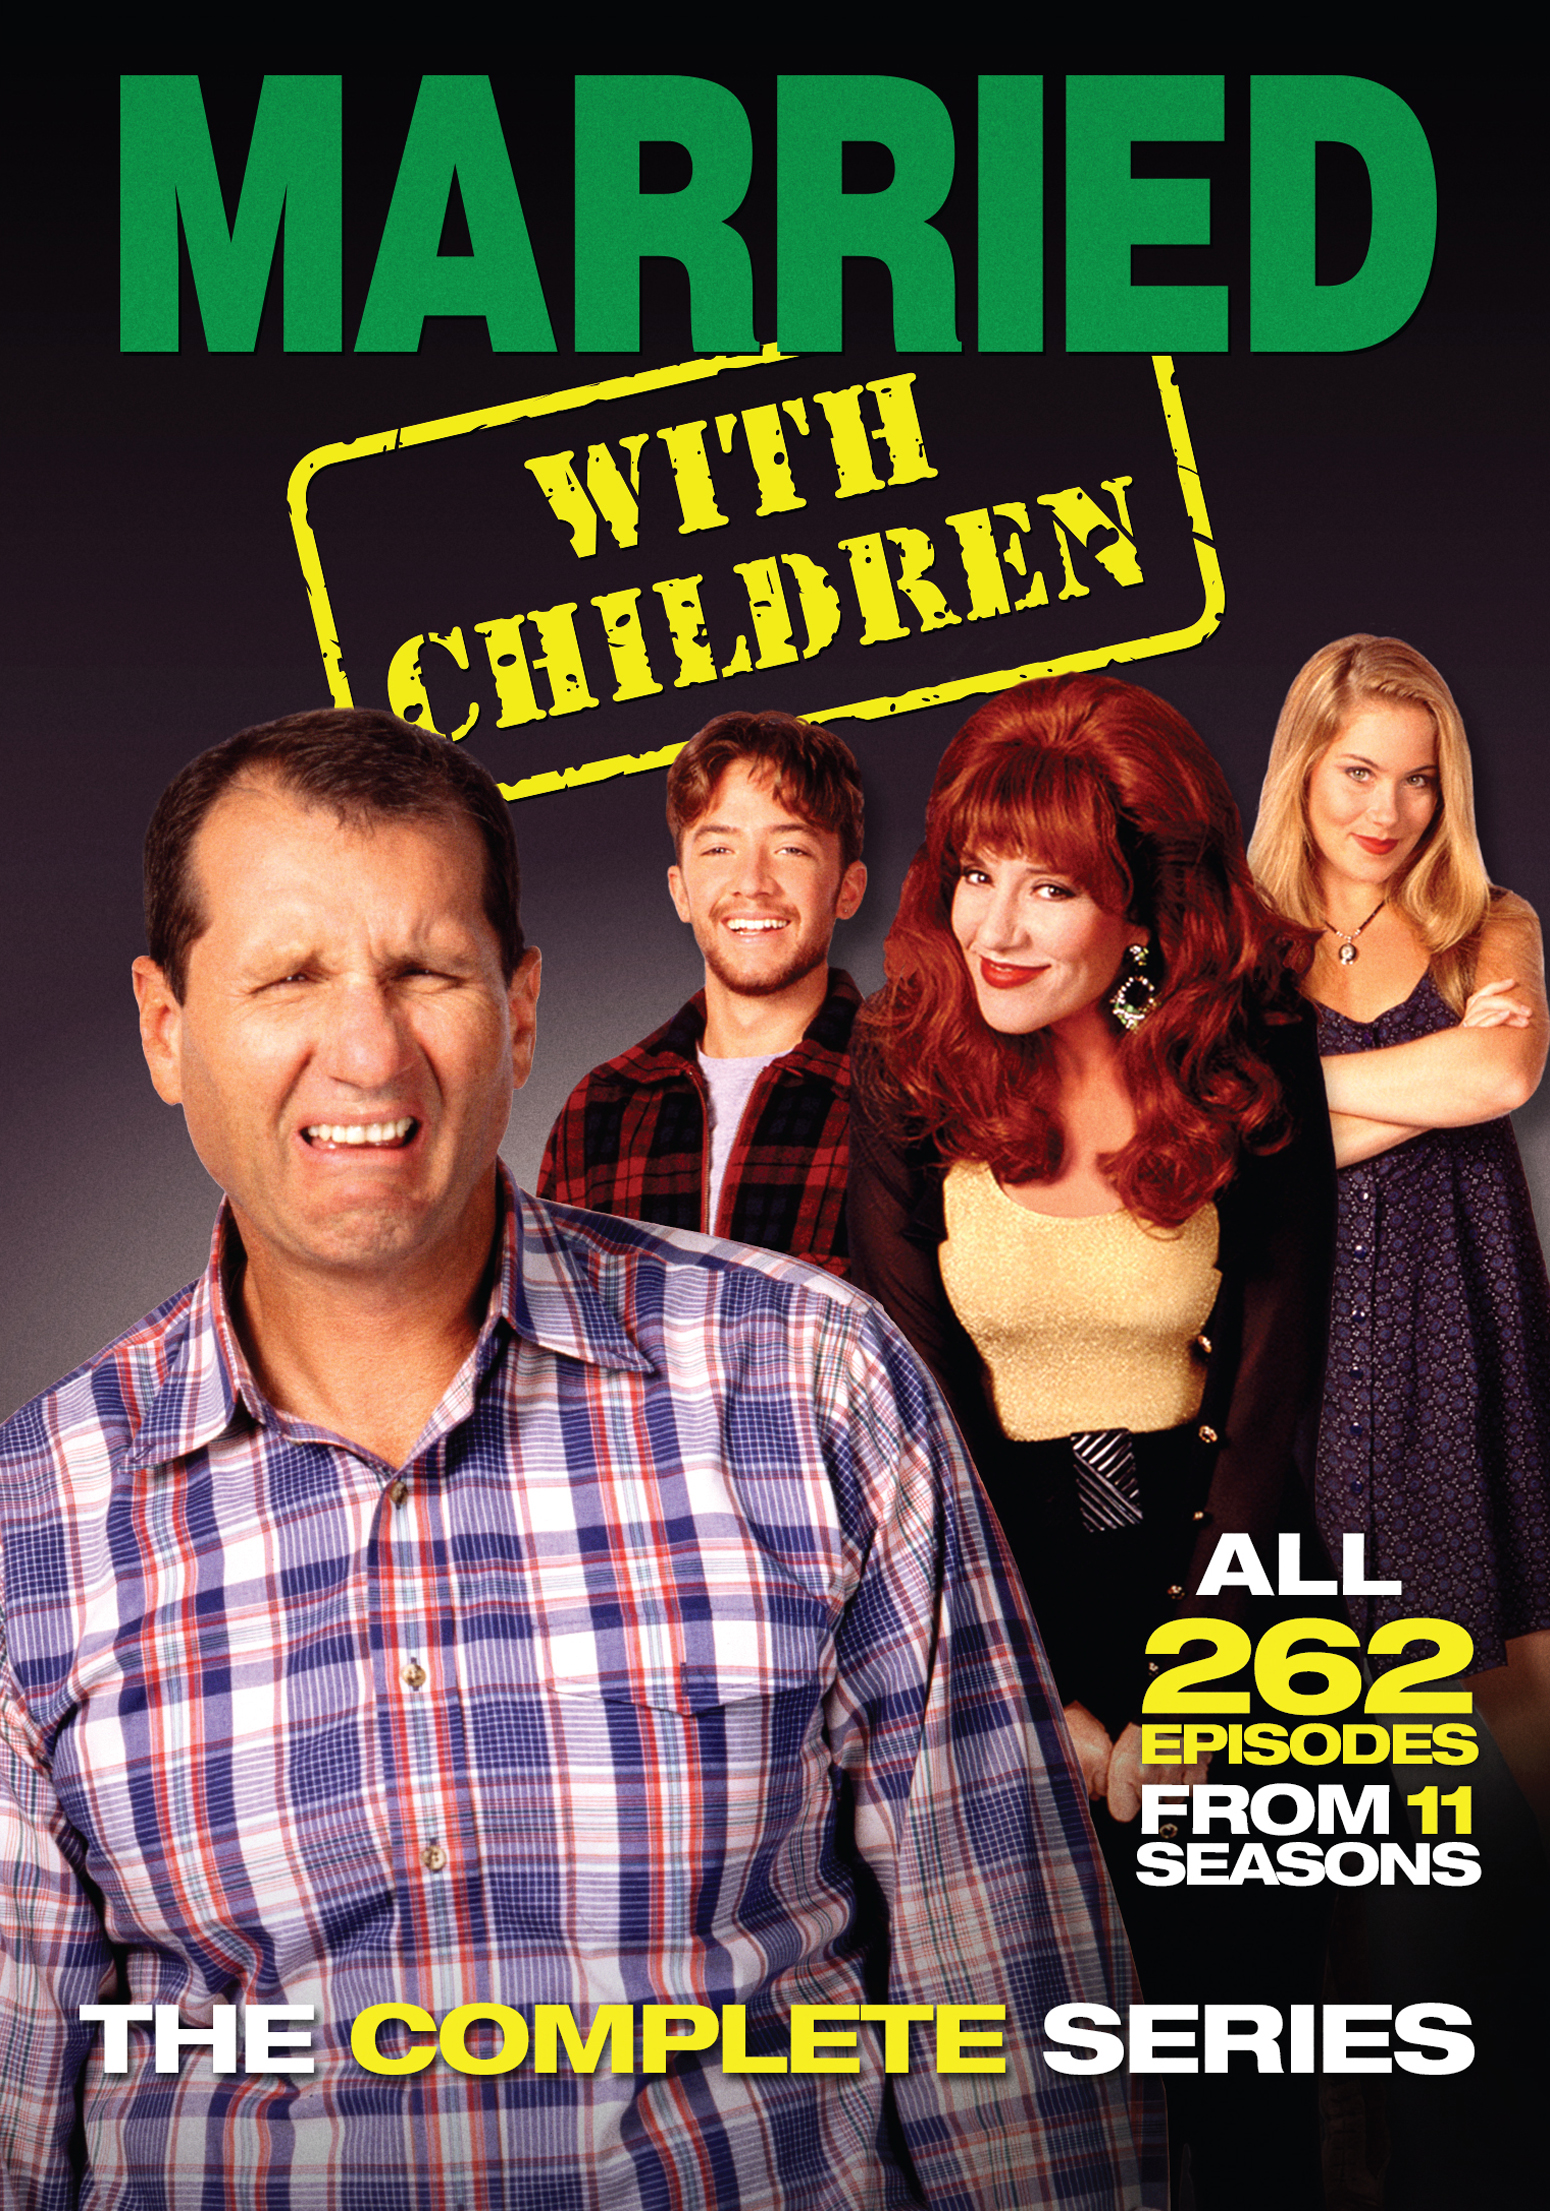 Married With Children Complete Series (DVD) - $16.99 @ Best Buy - Out Of Stock Online, Available In Select Stores